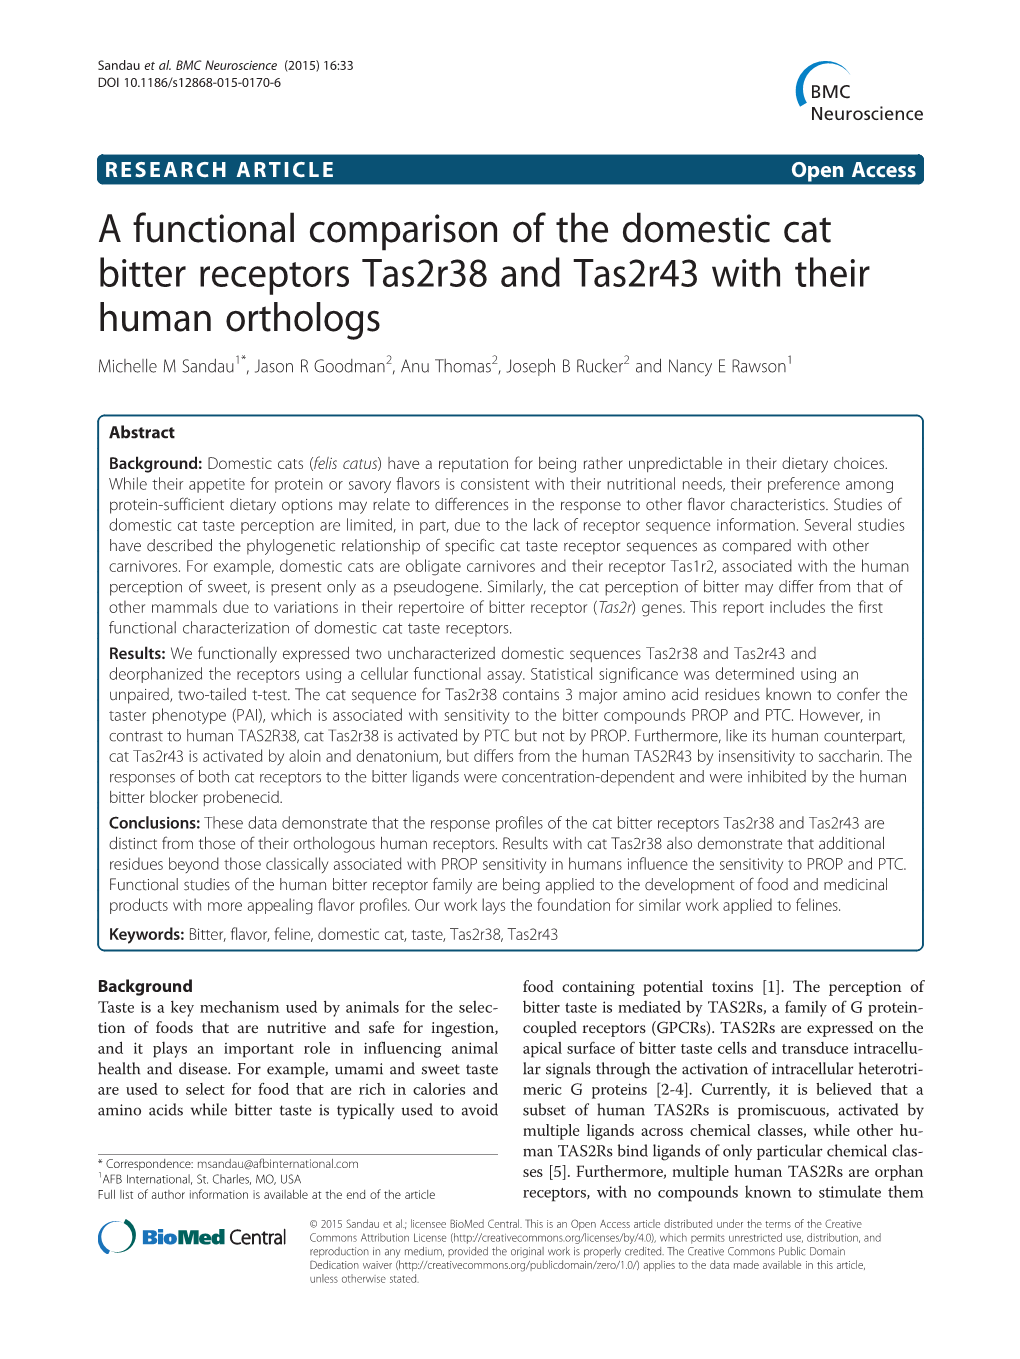 A Functional Comparison of the Domestic Cat Bitter Receptors